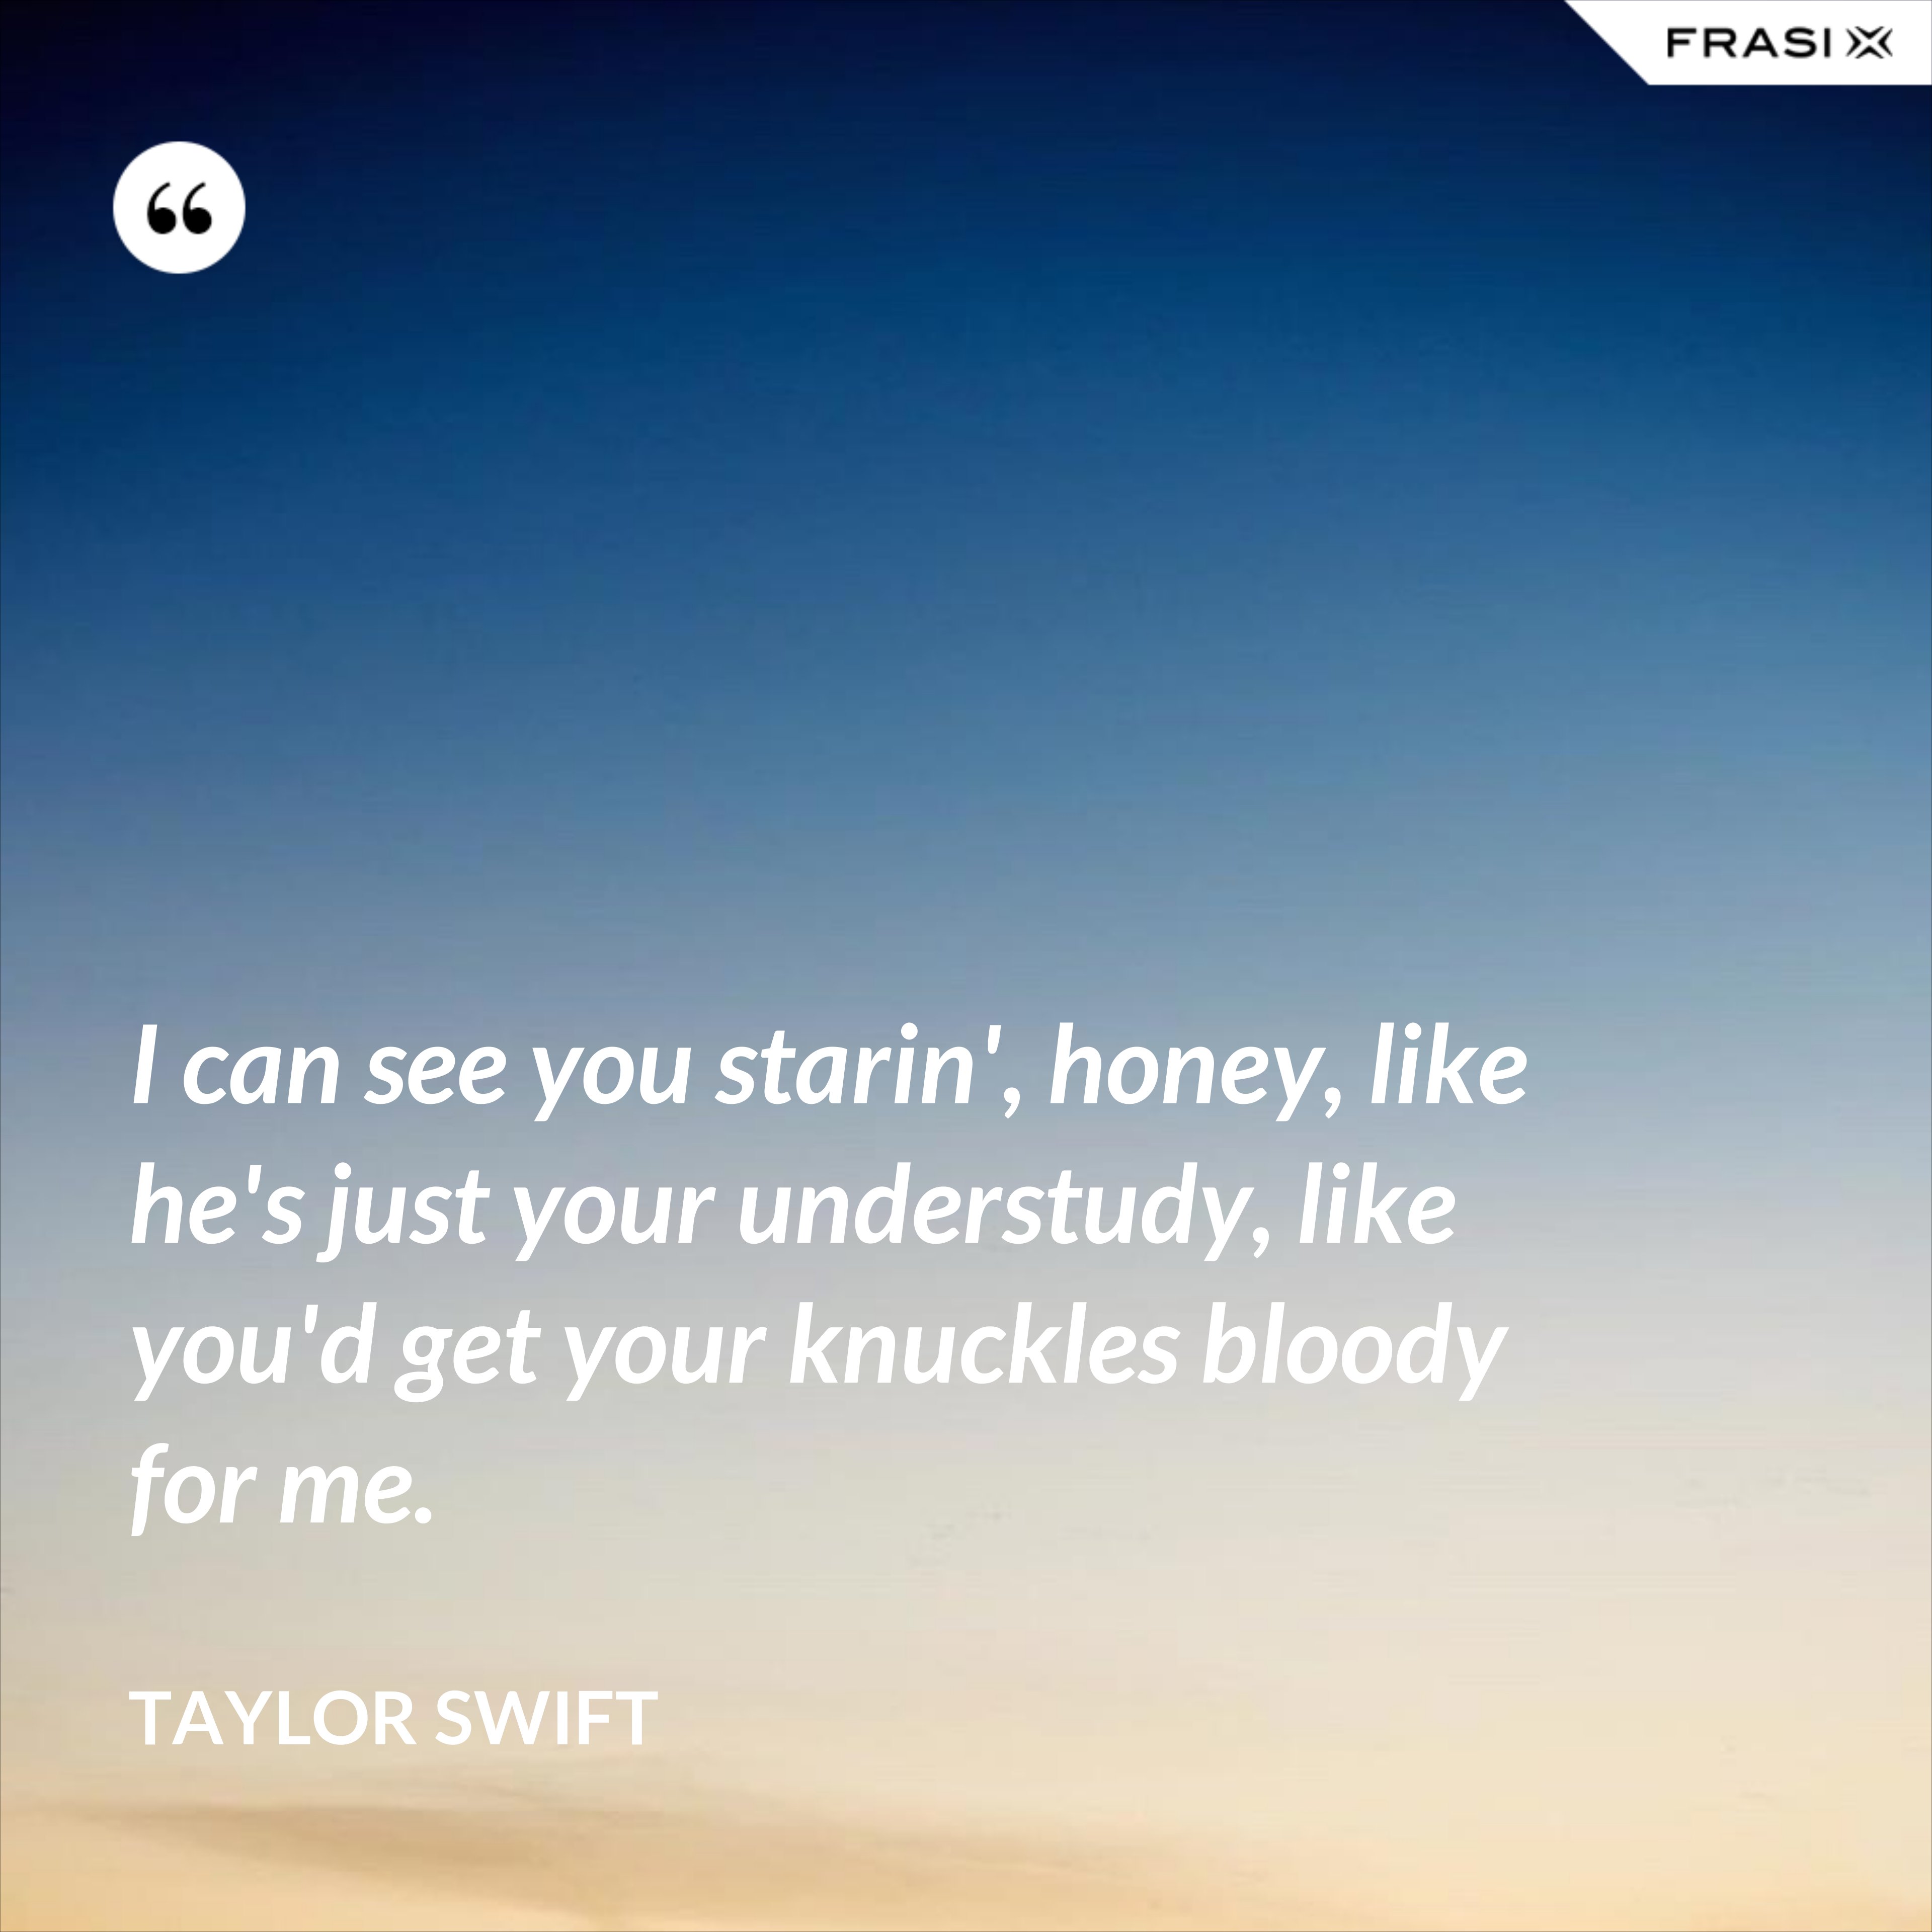 I can see you starin', honey, like he's just your understudy, like you'd get your knuckles bloody for me. - Taylor Swift